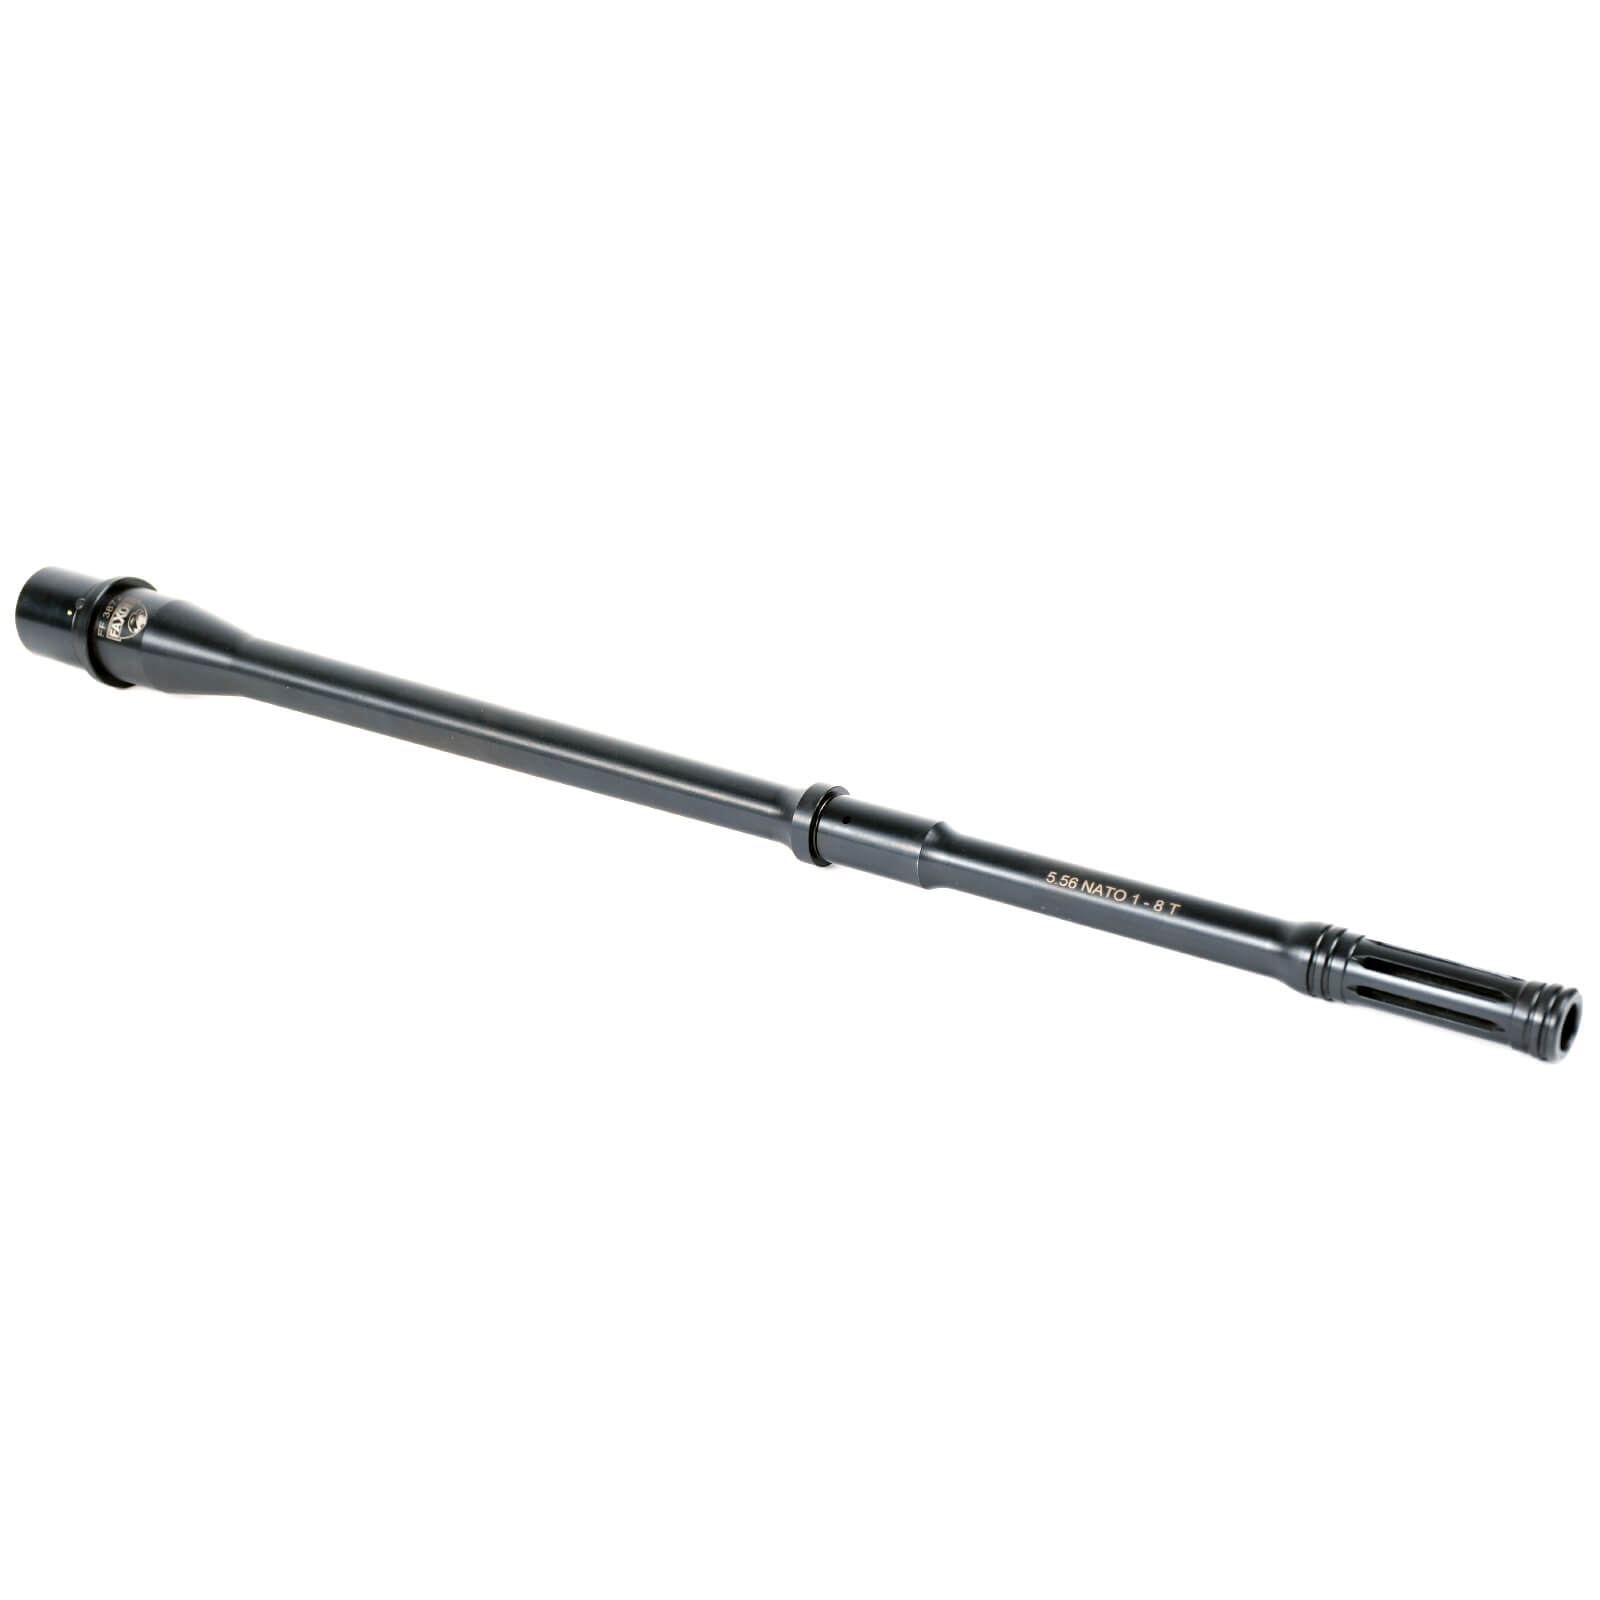 Faxon Firearms 16 Inch Overall Pencil Barrel with Integrated Flash Hider - 5.56 NATO